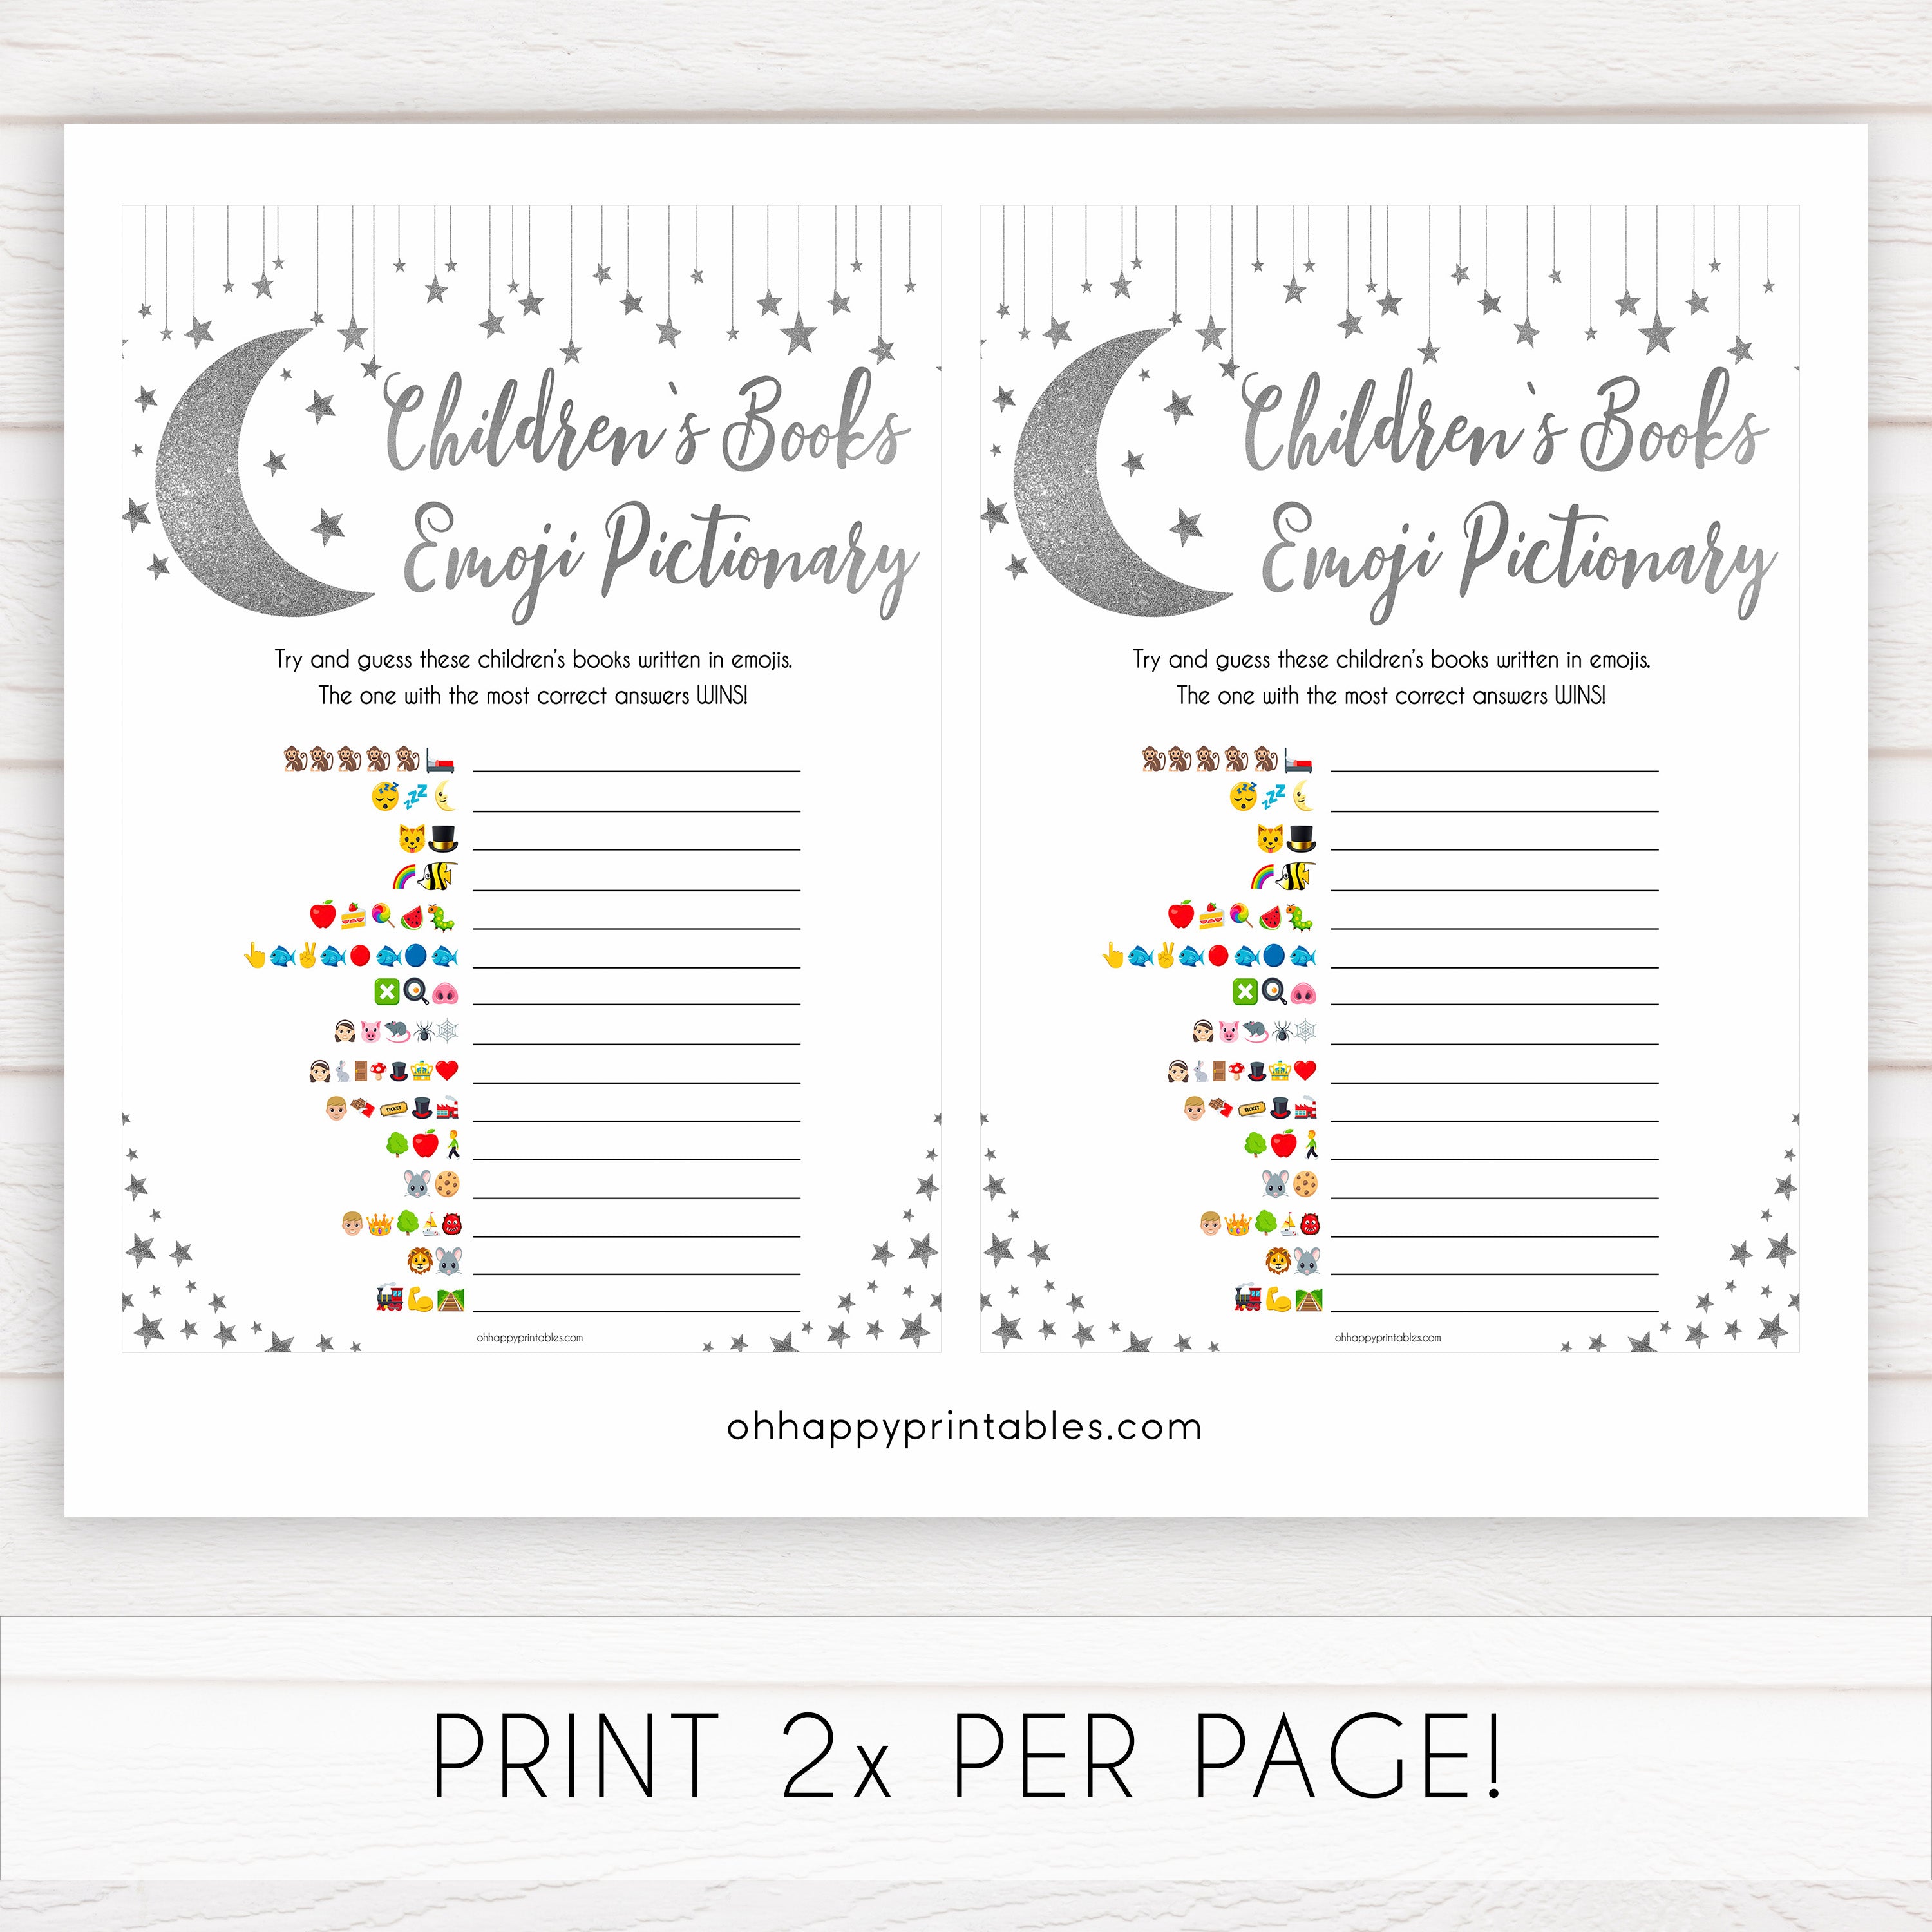 Silver little star, childrens book emoji pictionary baby games, baby shower games, printable baby games, fun baby games, twinkle little star games, baby games, fun baby shower ideas, baby shower ideas